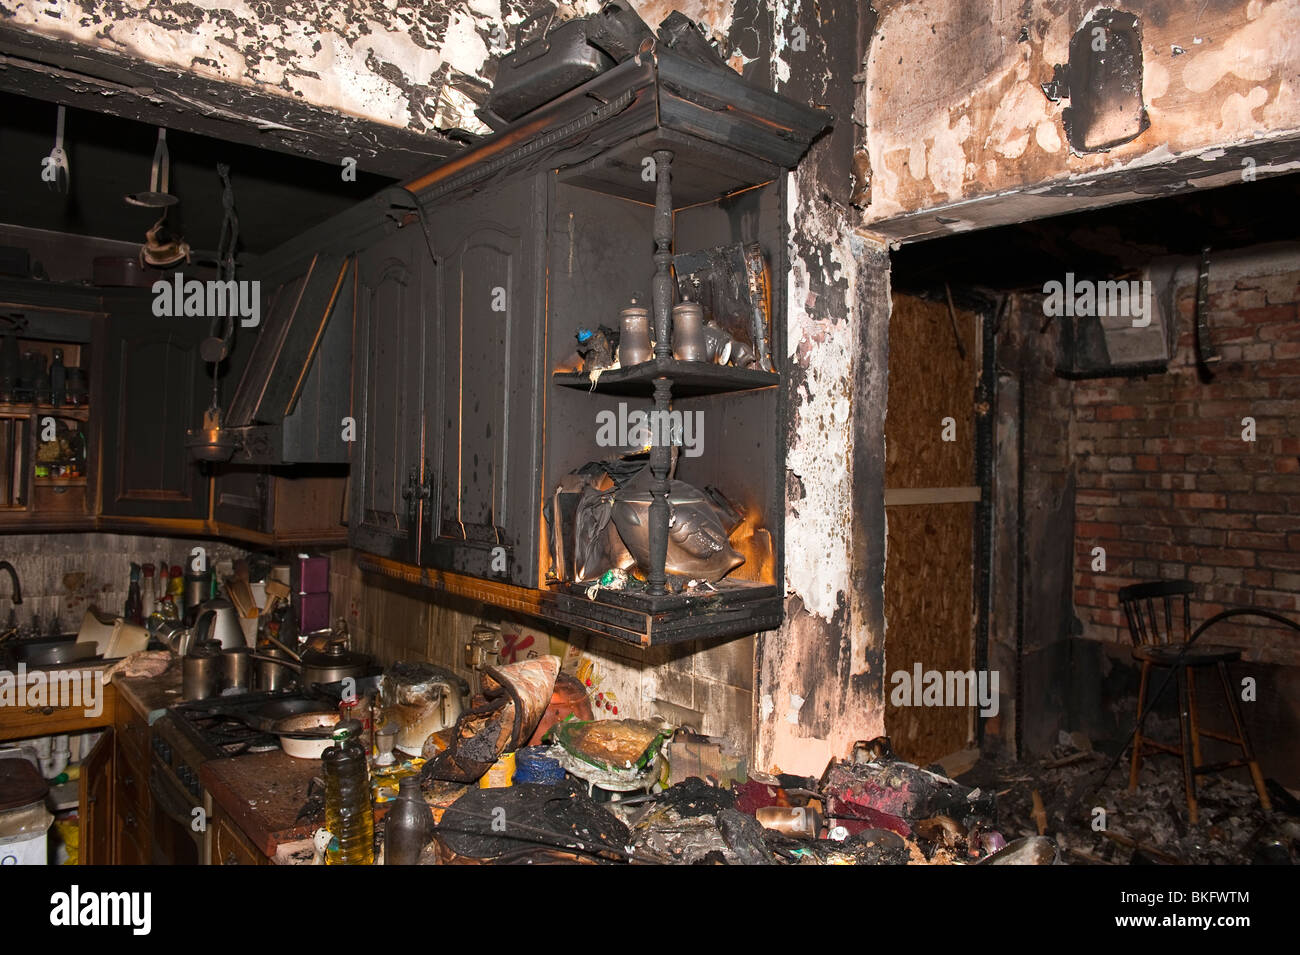 Kitchen food and units severely damaged following domestic house kitchen fire Stock Photo